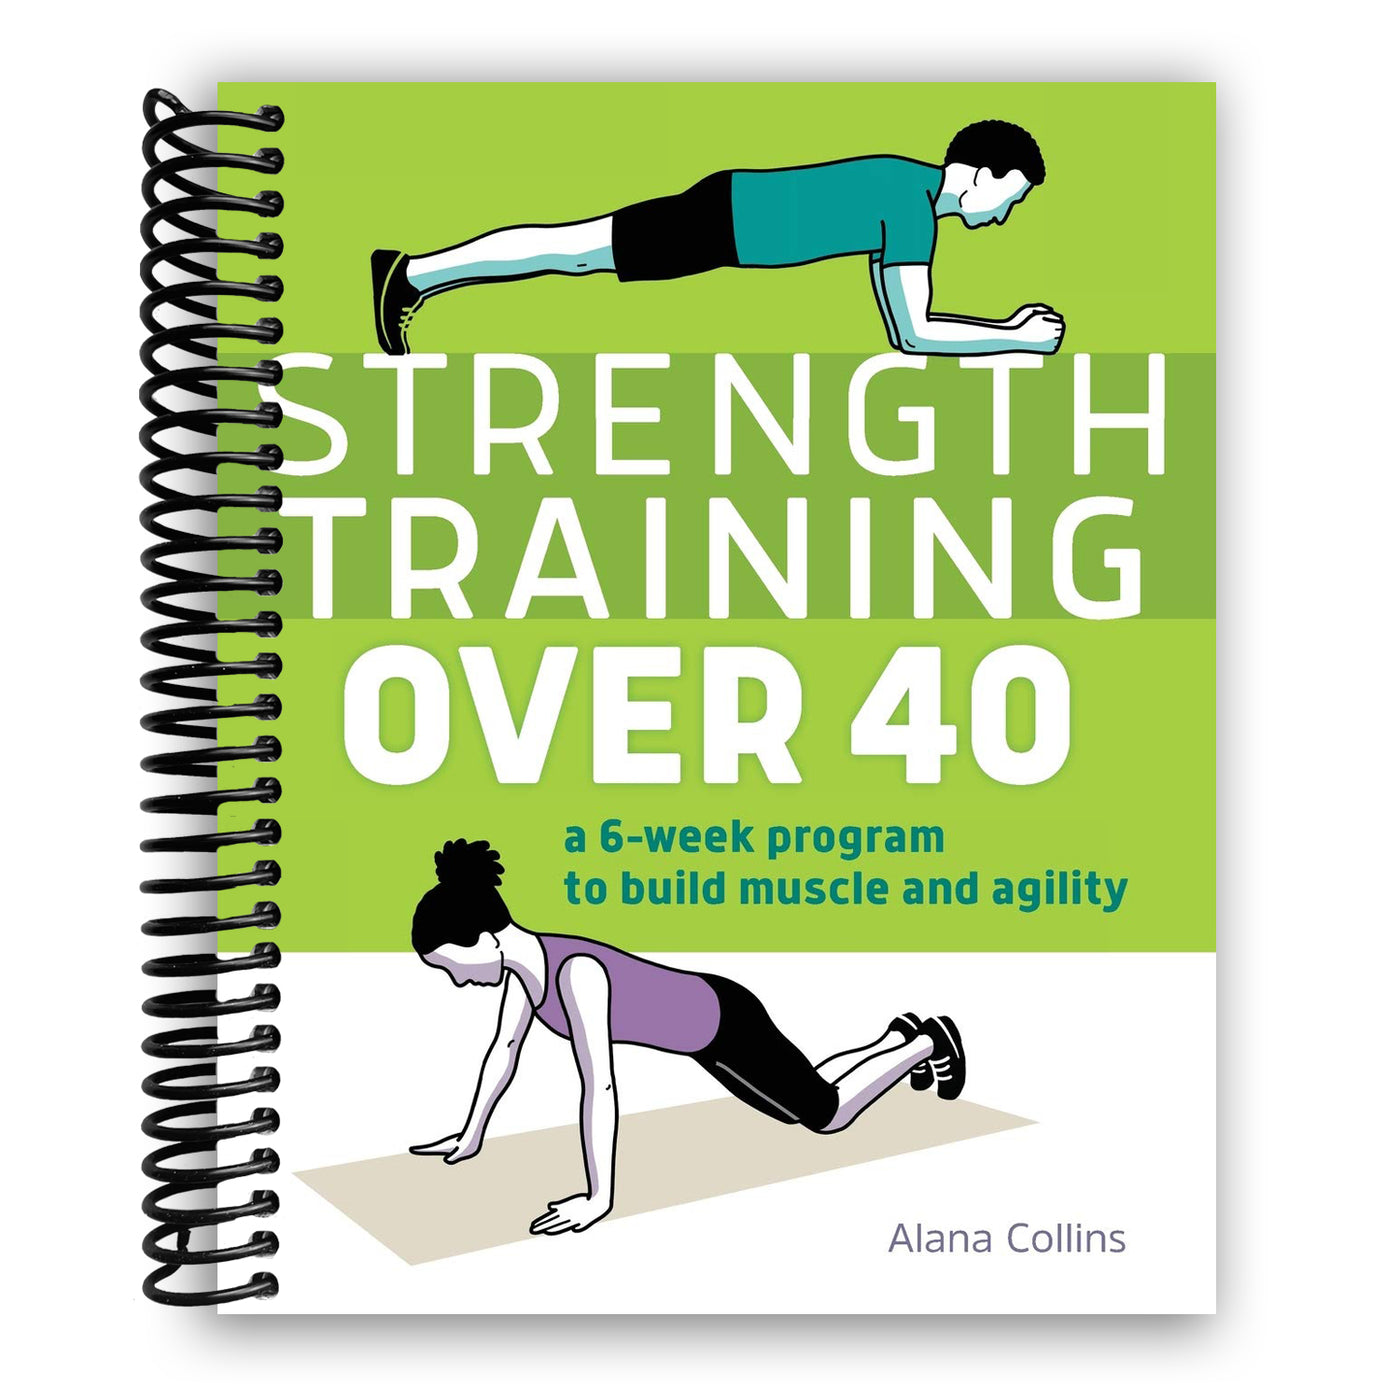 Strength Training Over 40: A 6-Week Program to Build Muscle and Agility (Spiral Bound)